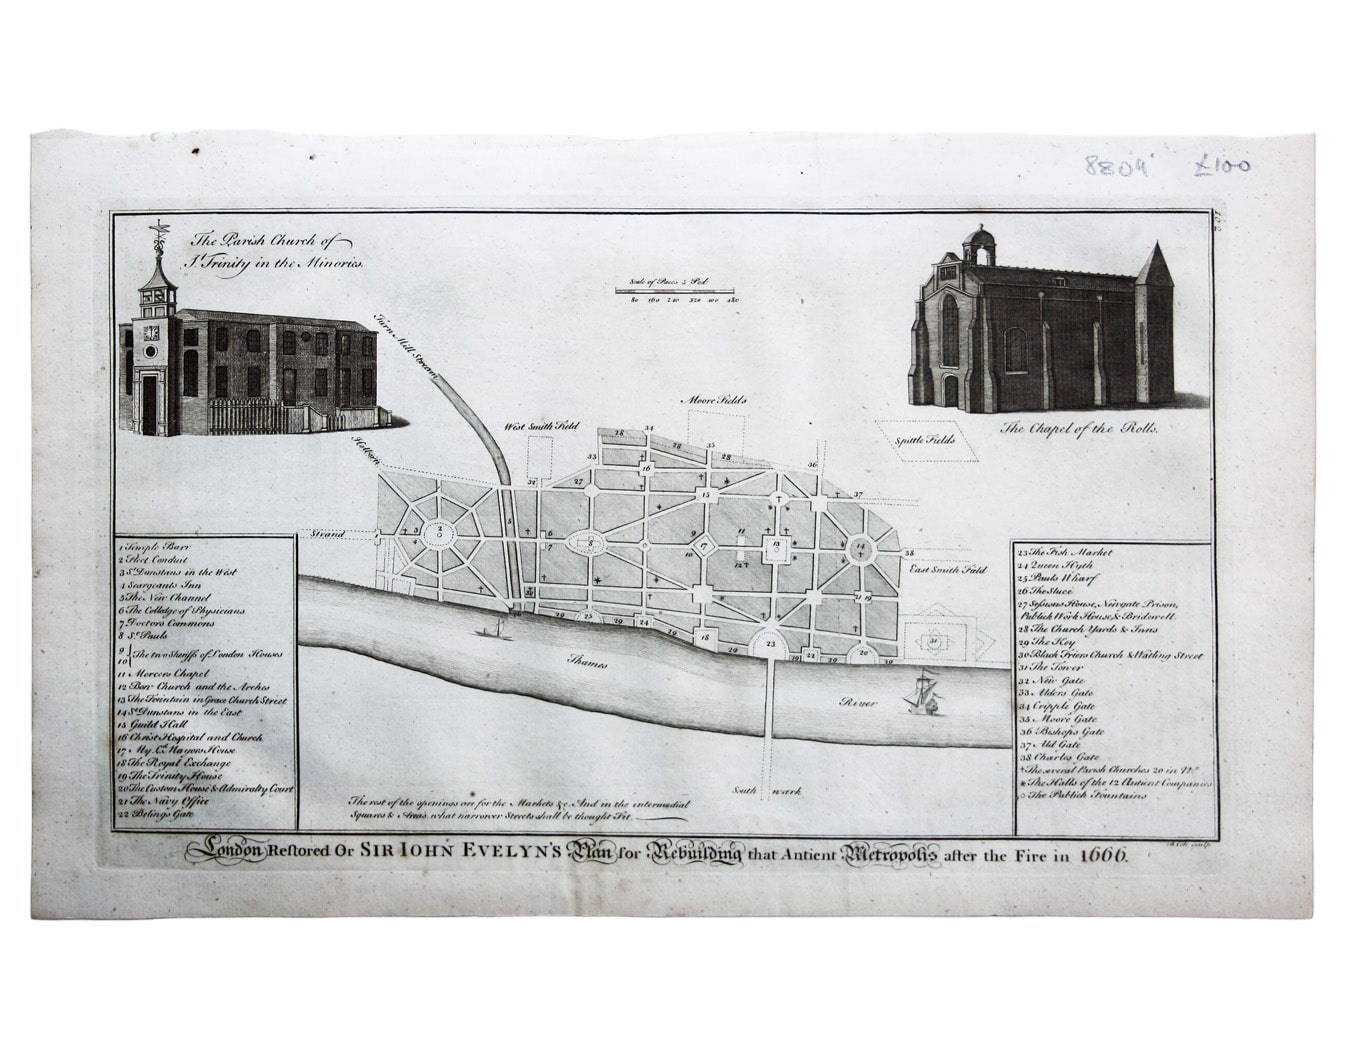 Evelyn’s Plan for Rebuilding London after the Great Fire